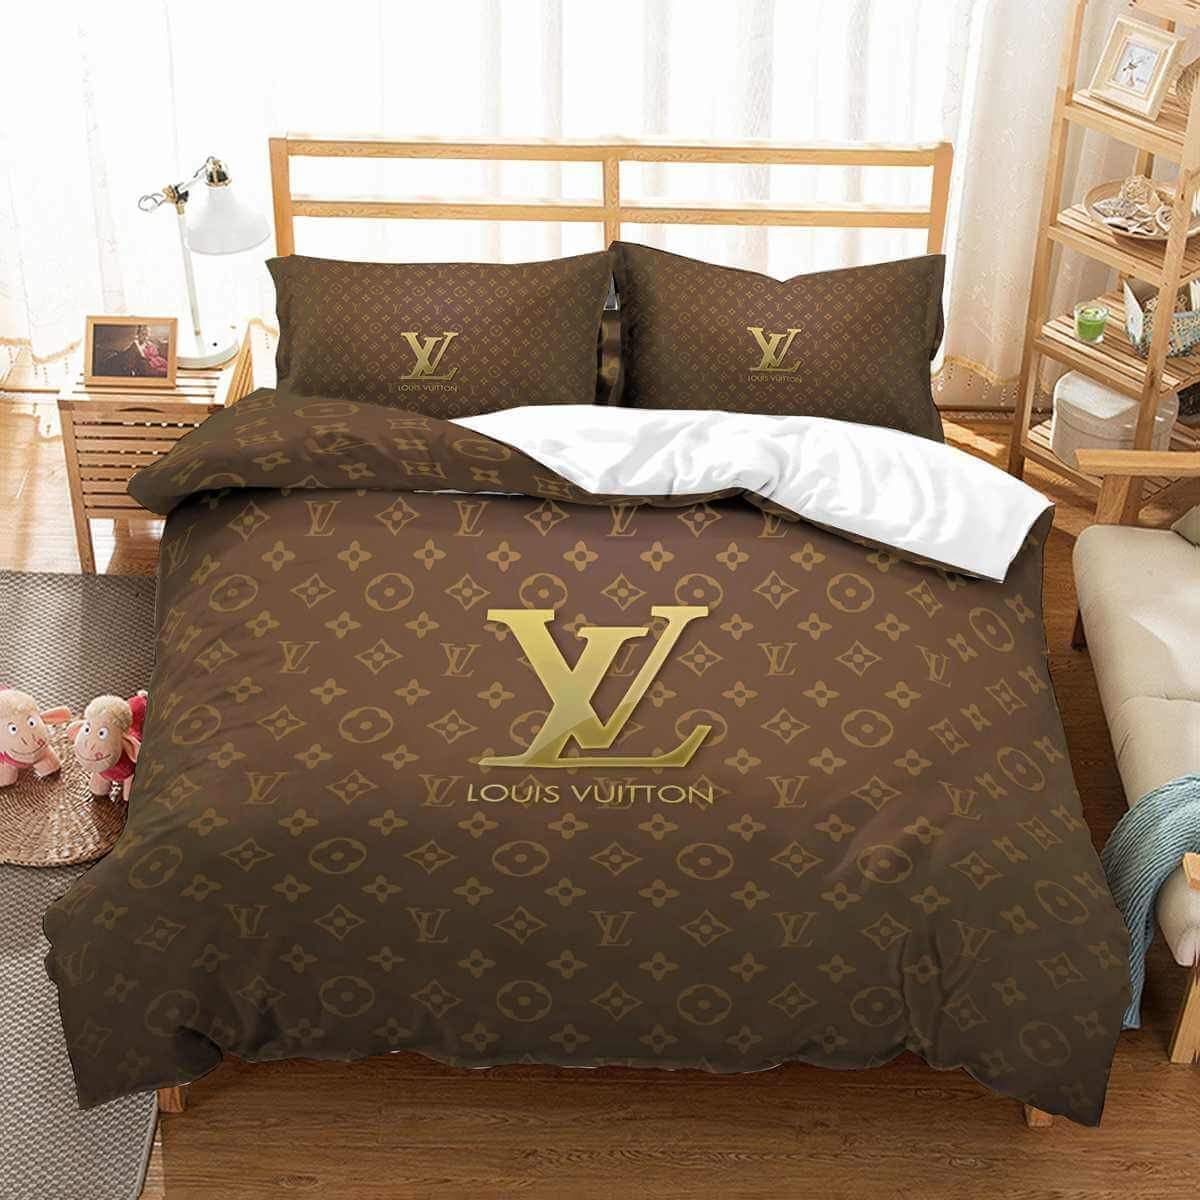 Let me show you about some luxury brand bedding set 2022 157